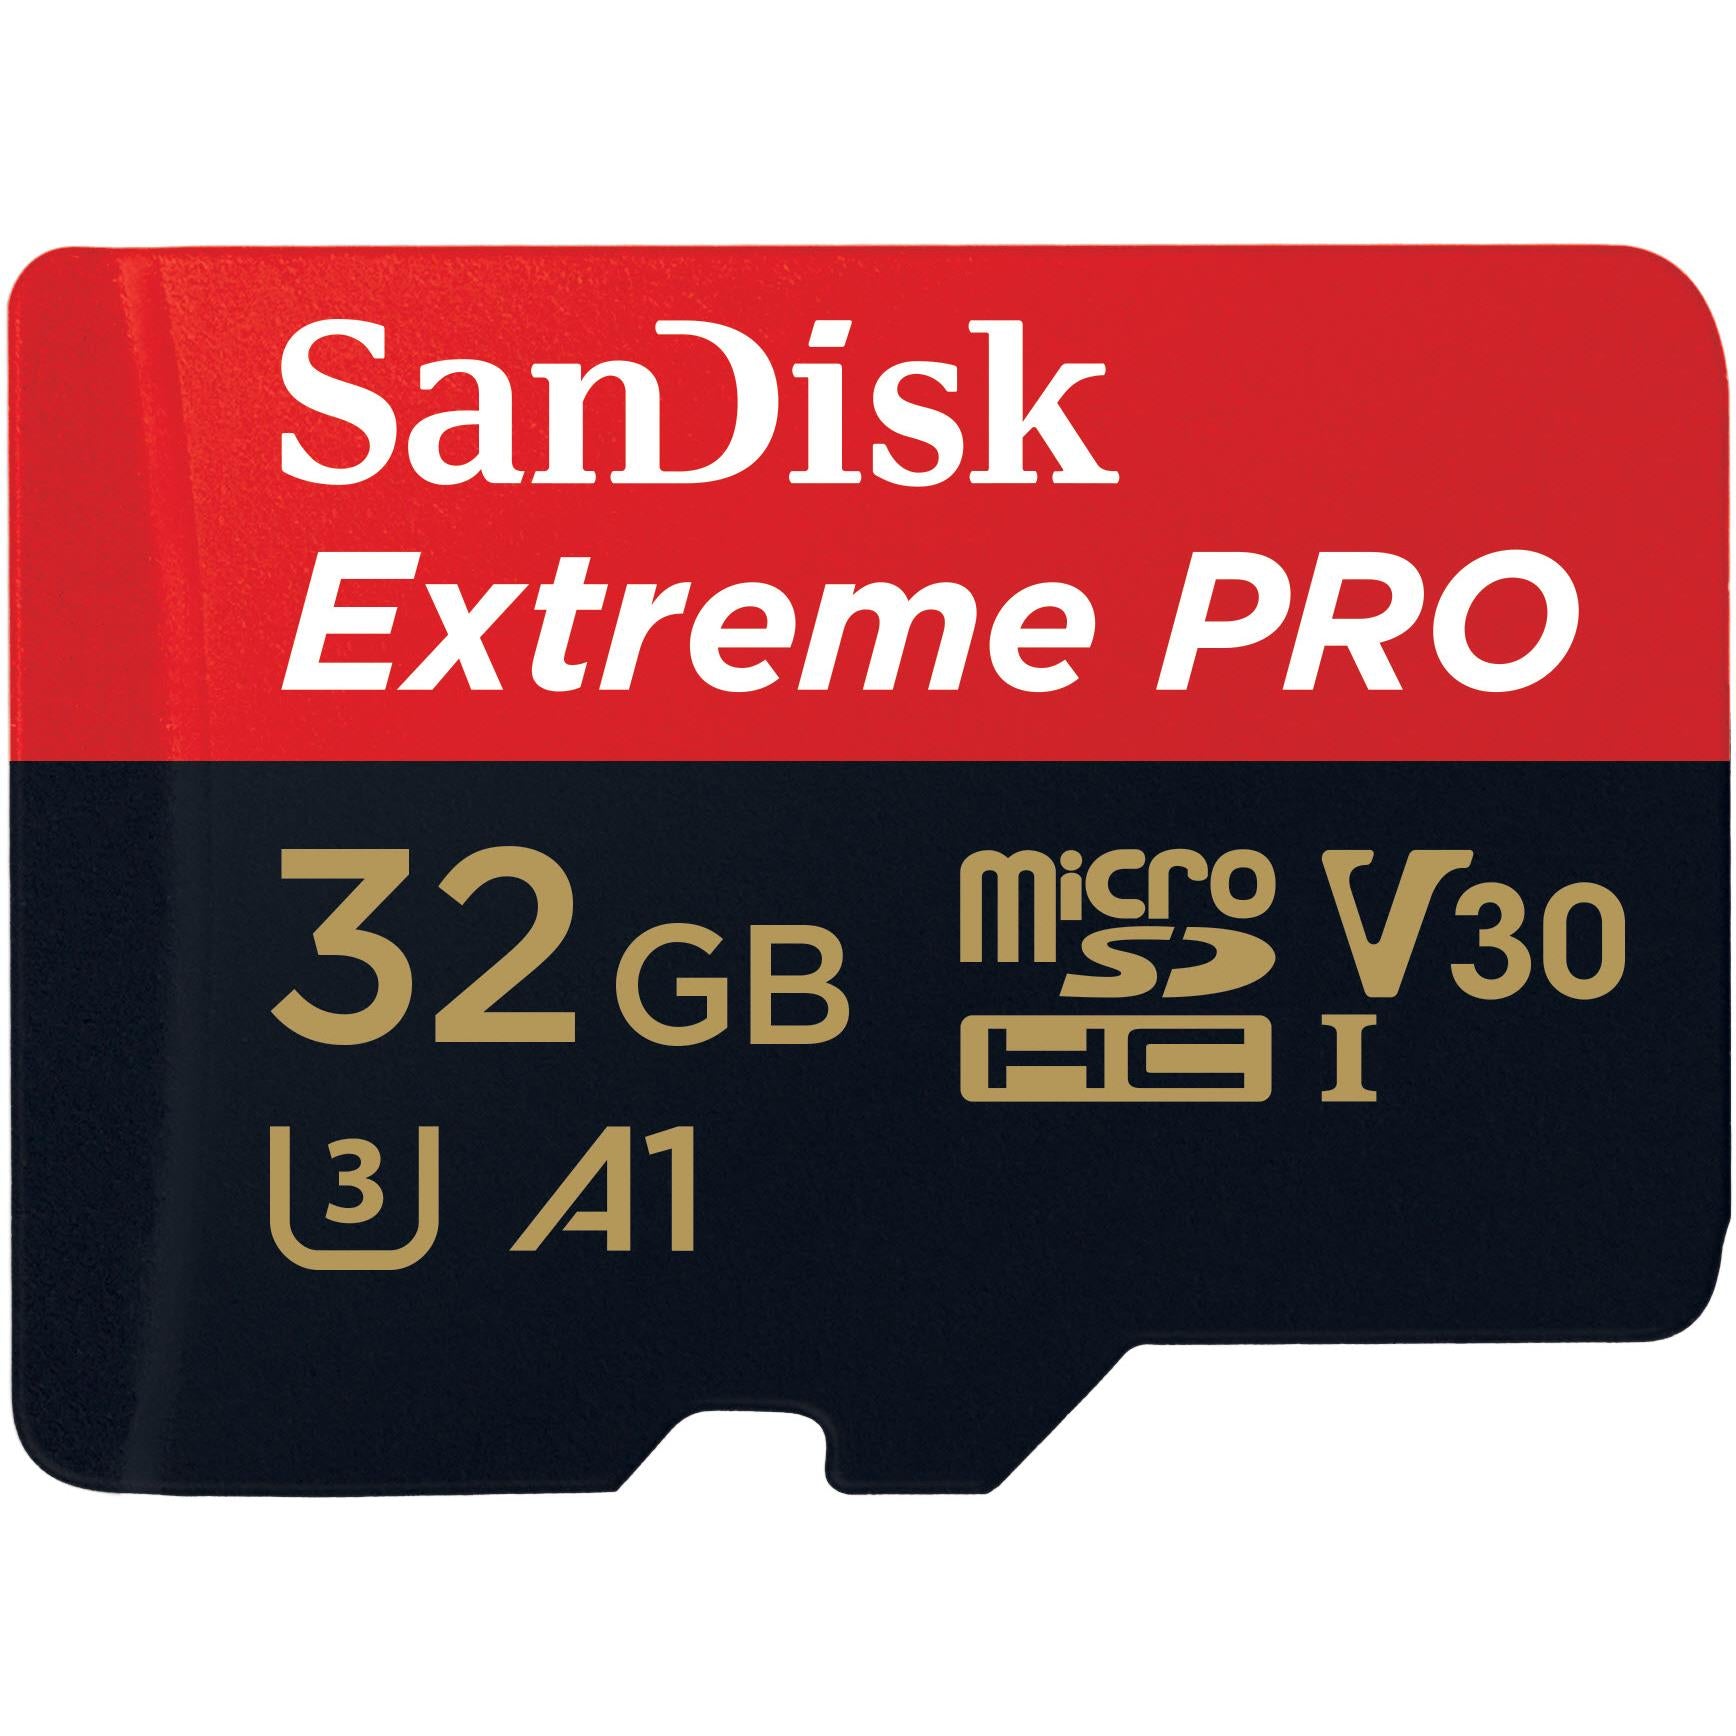 sandisk extreme pro microsd 32gb 95mb/s memory card